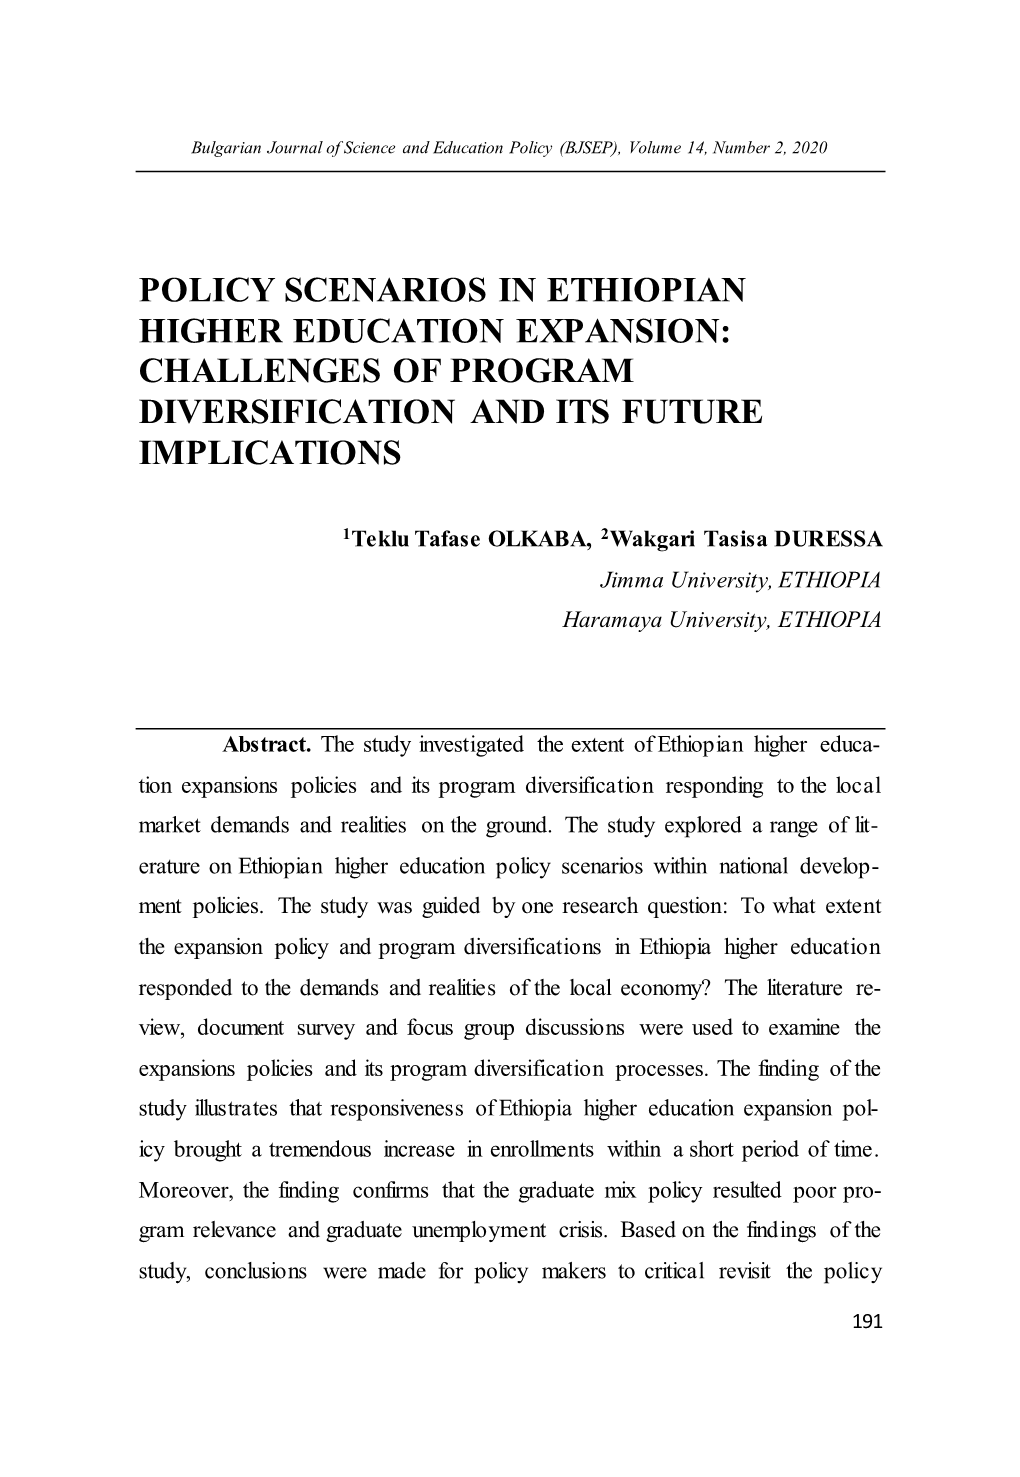 Policy Scenarios in Ethiopian Higher Education Expansion: Challenges of Program Diversification and Its Future Implications